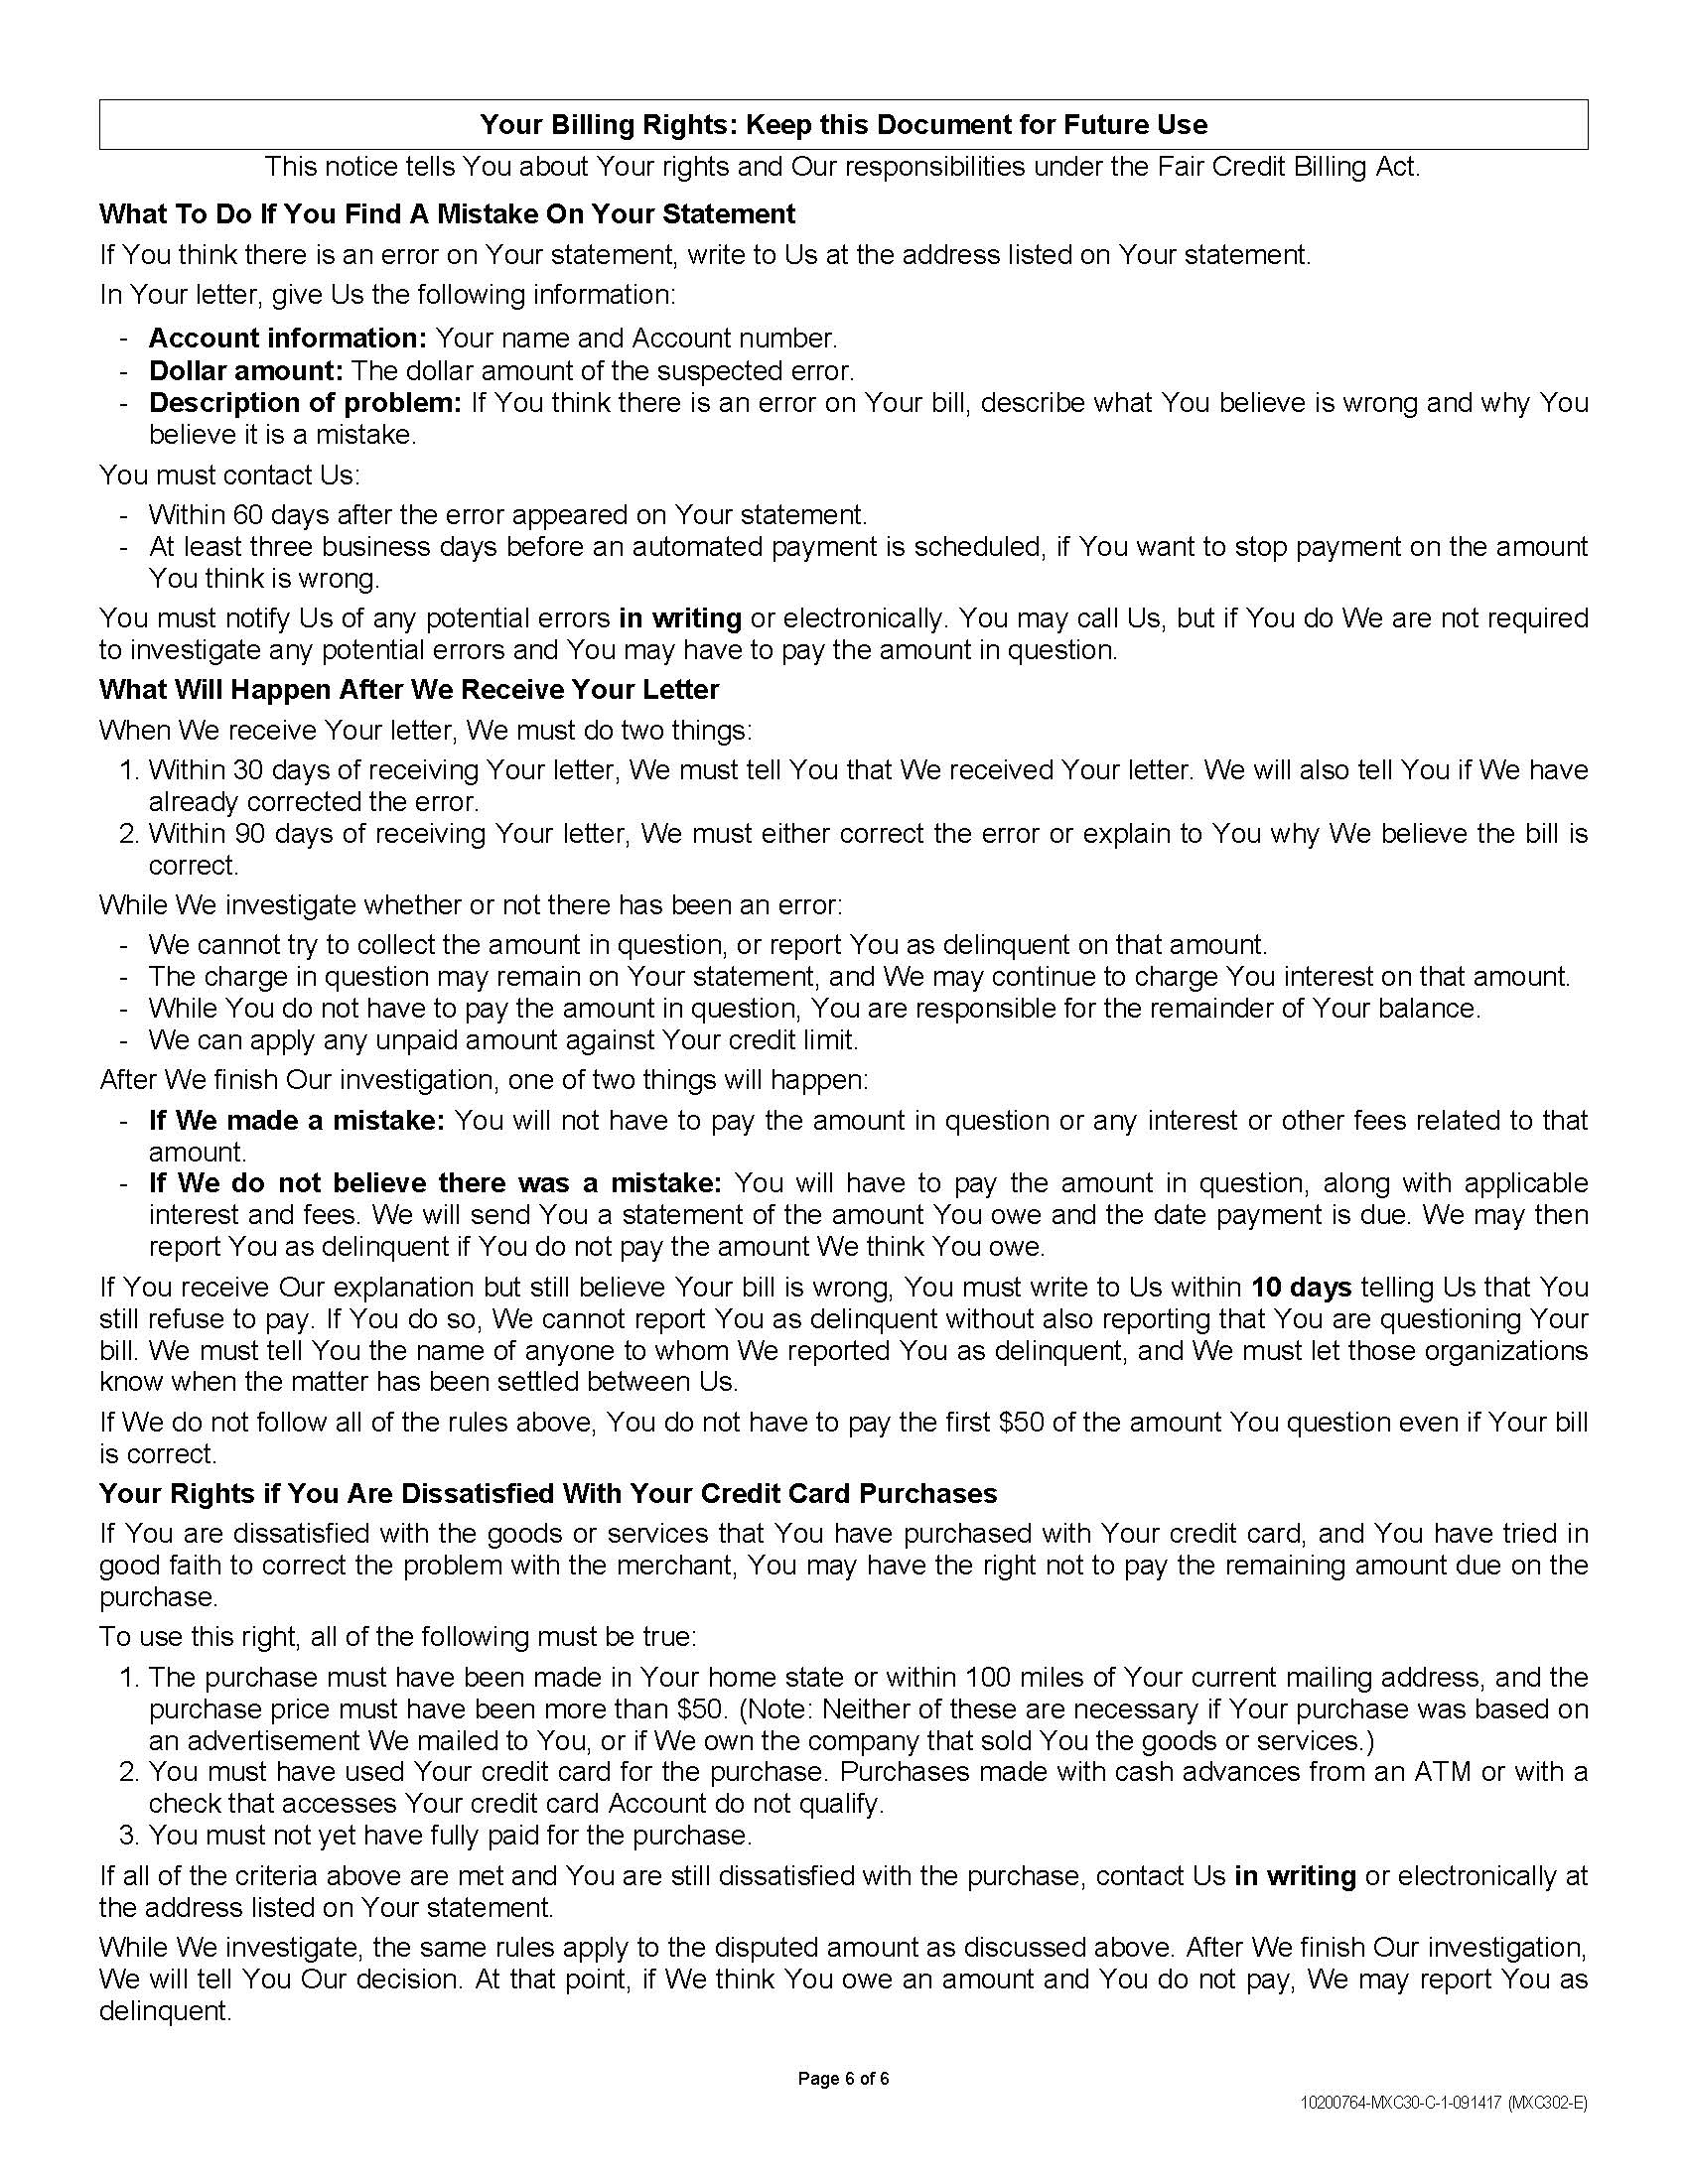 Credit Card Agreement_Page_6